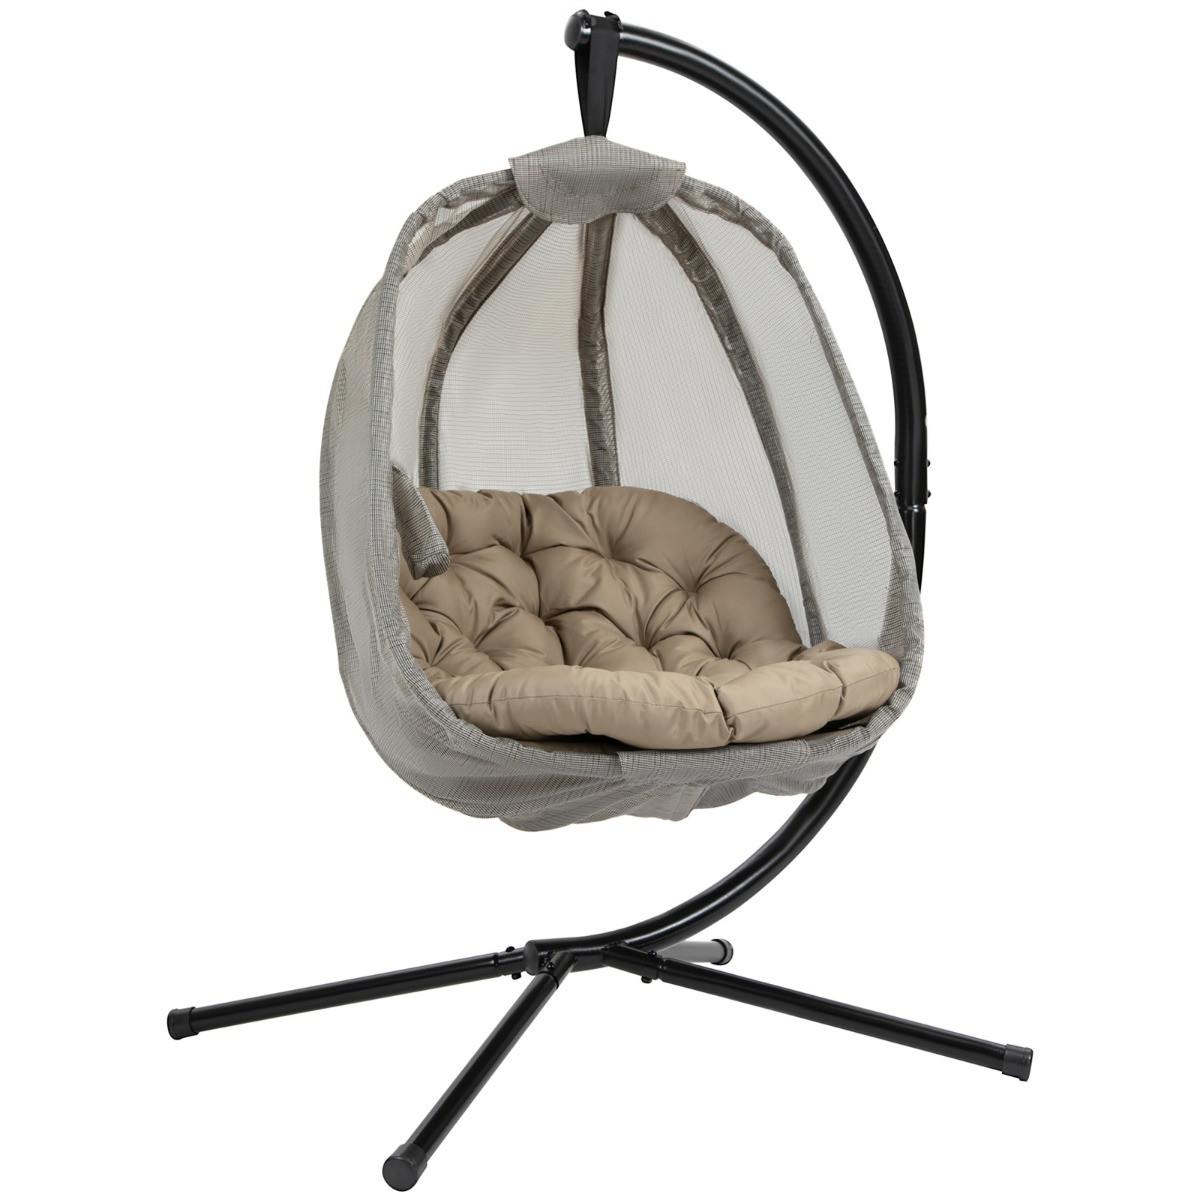 Outsunny Hanging Egg Chair Swing Hammock With Cushion - Khaki>